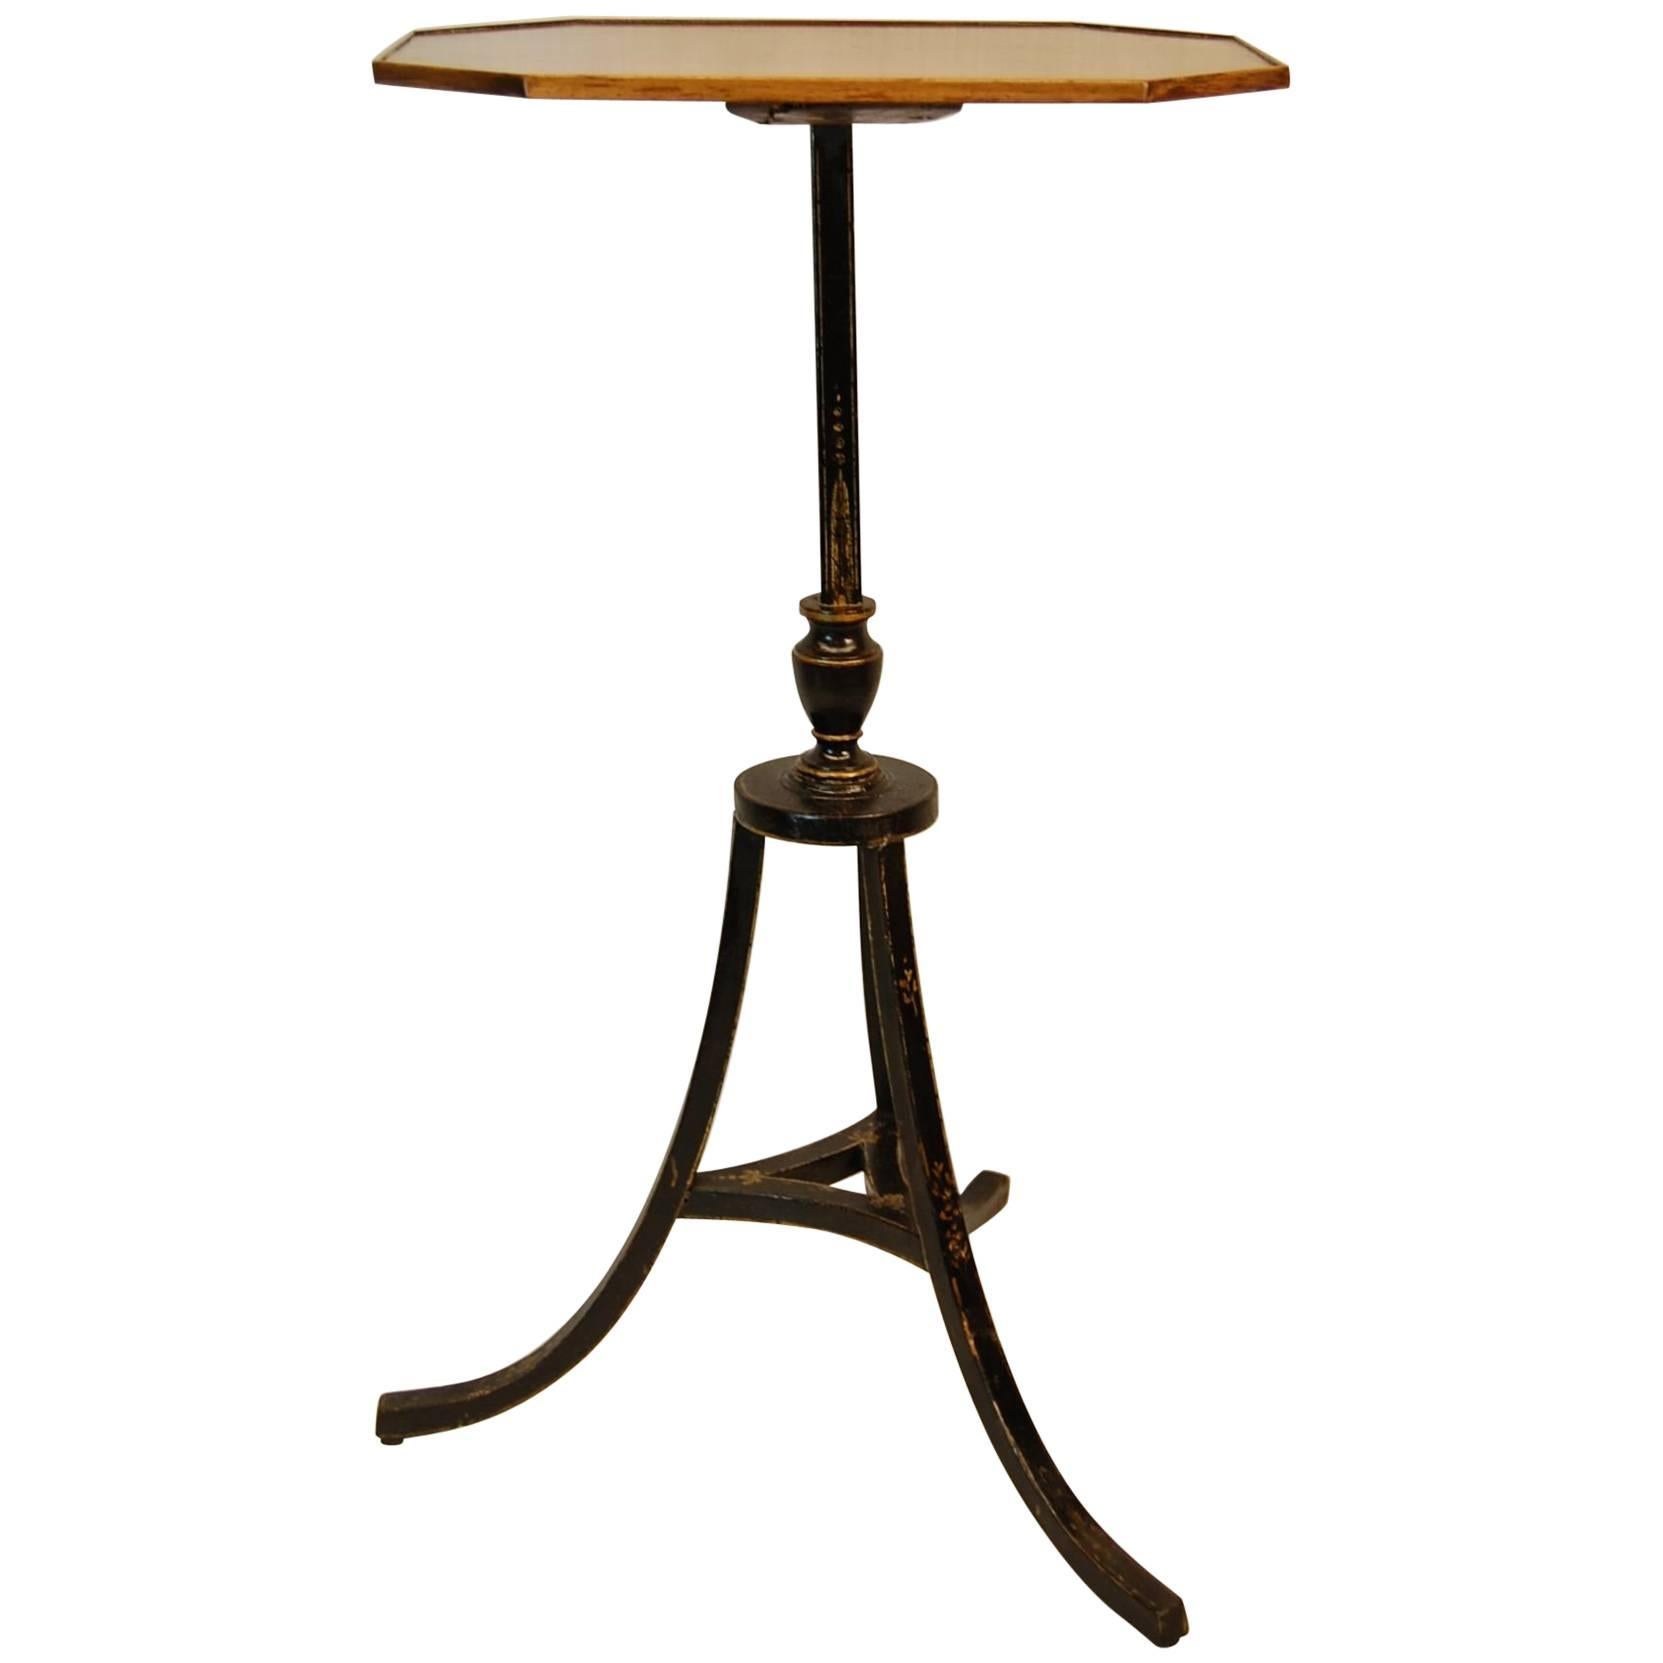 English Hepplewhite Pedestal Candle Stand circa 1800, Black Lacquered Base For Sale